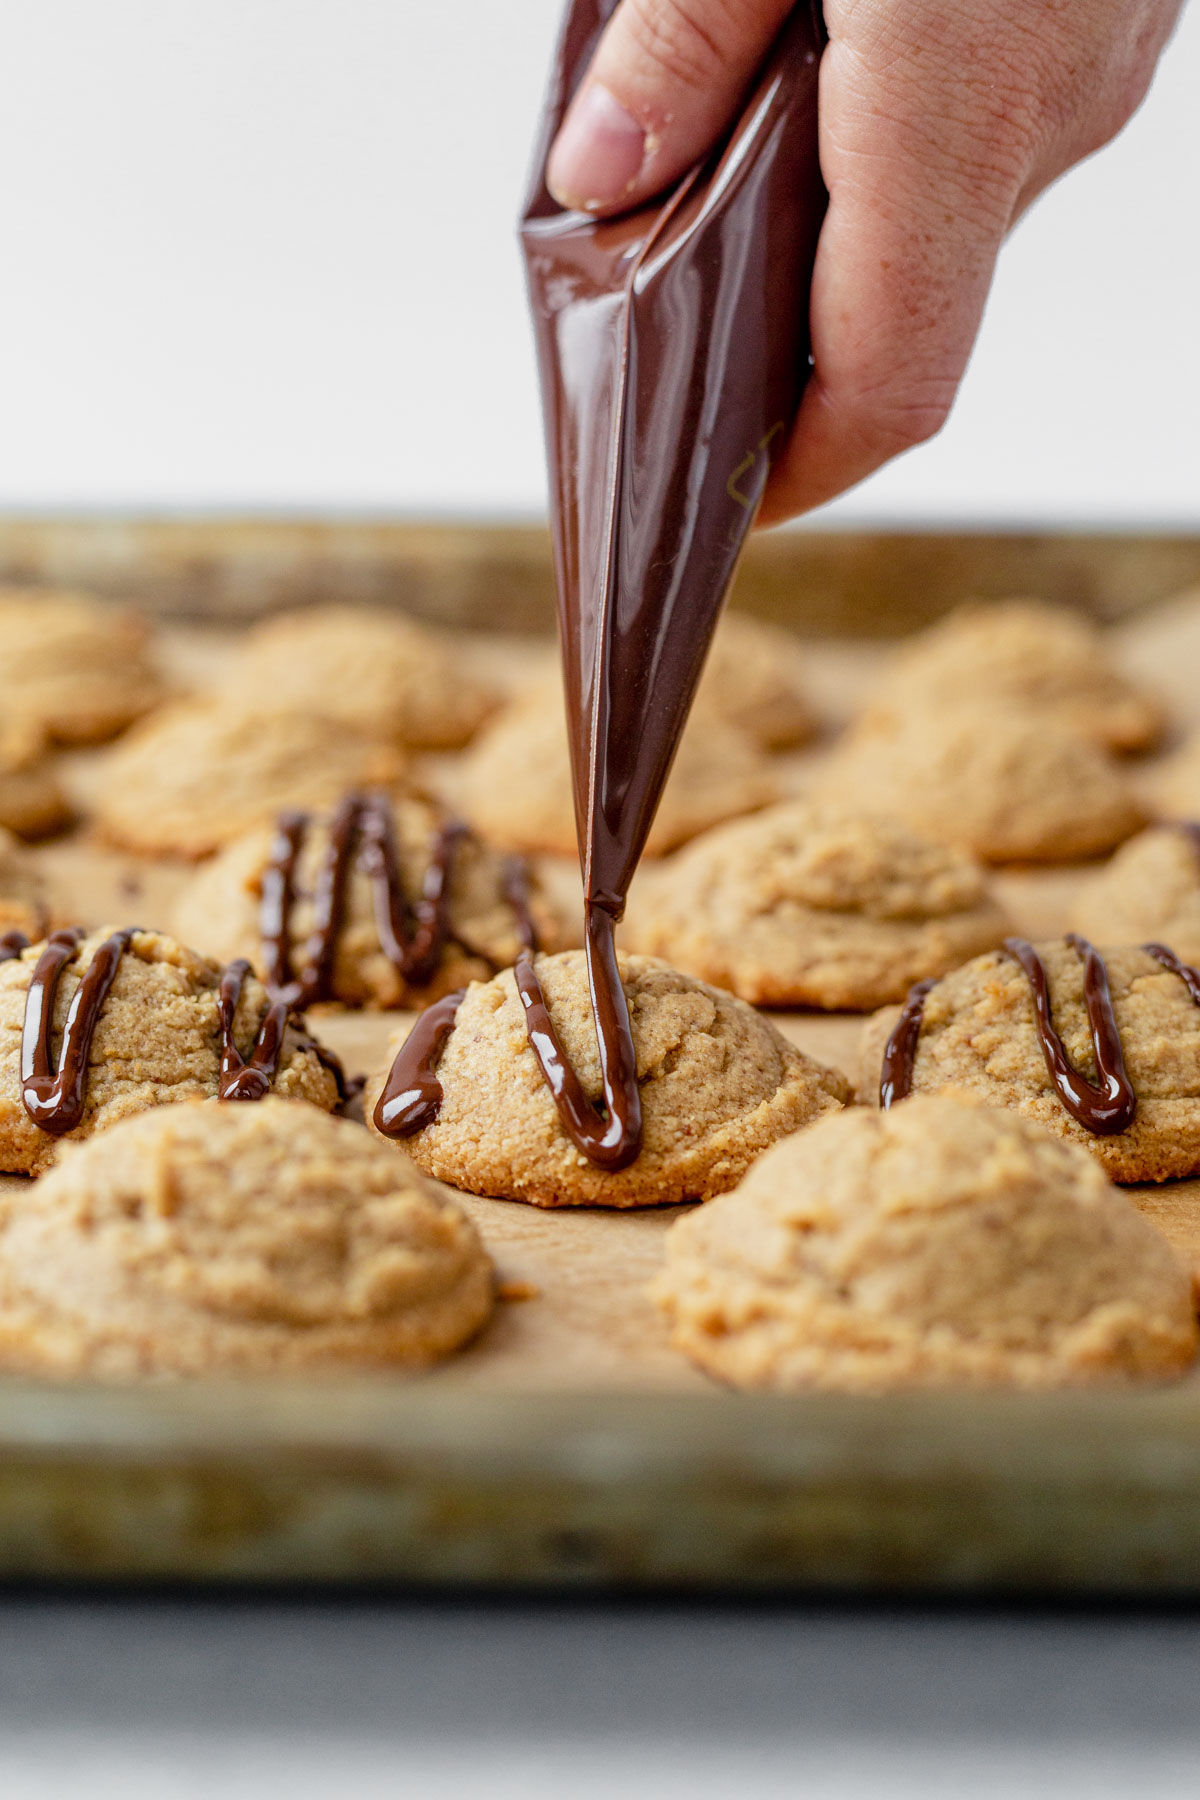 melted chocolate drizzling over a peanut butter cookie with almond flour